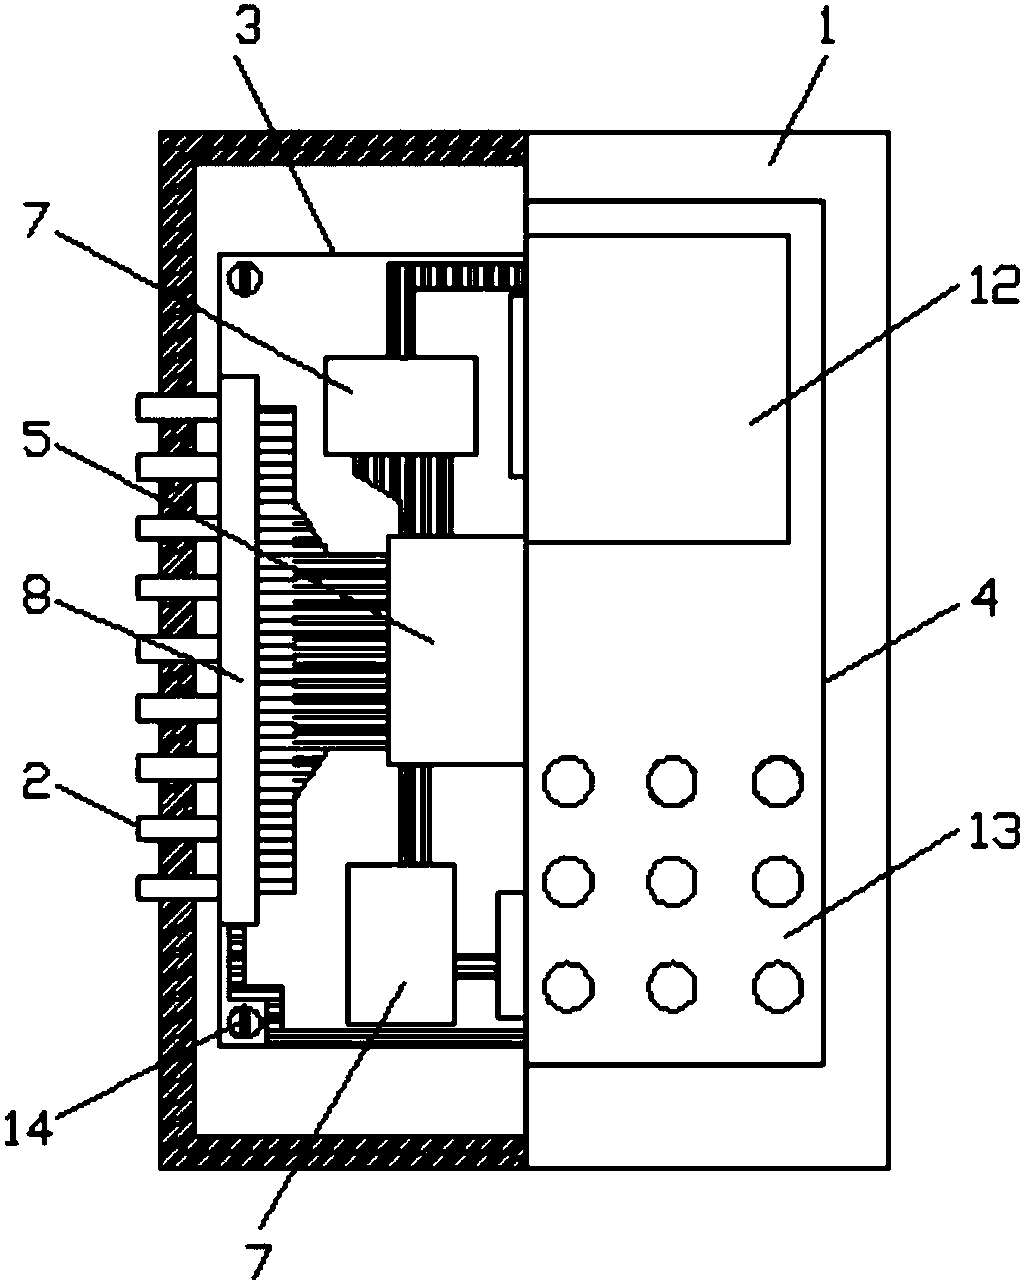 Intelligent manufacturing private network data collecting and dispatching system